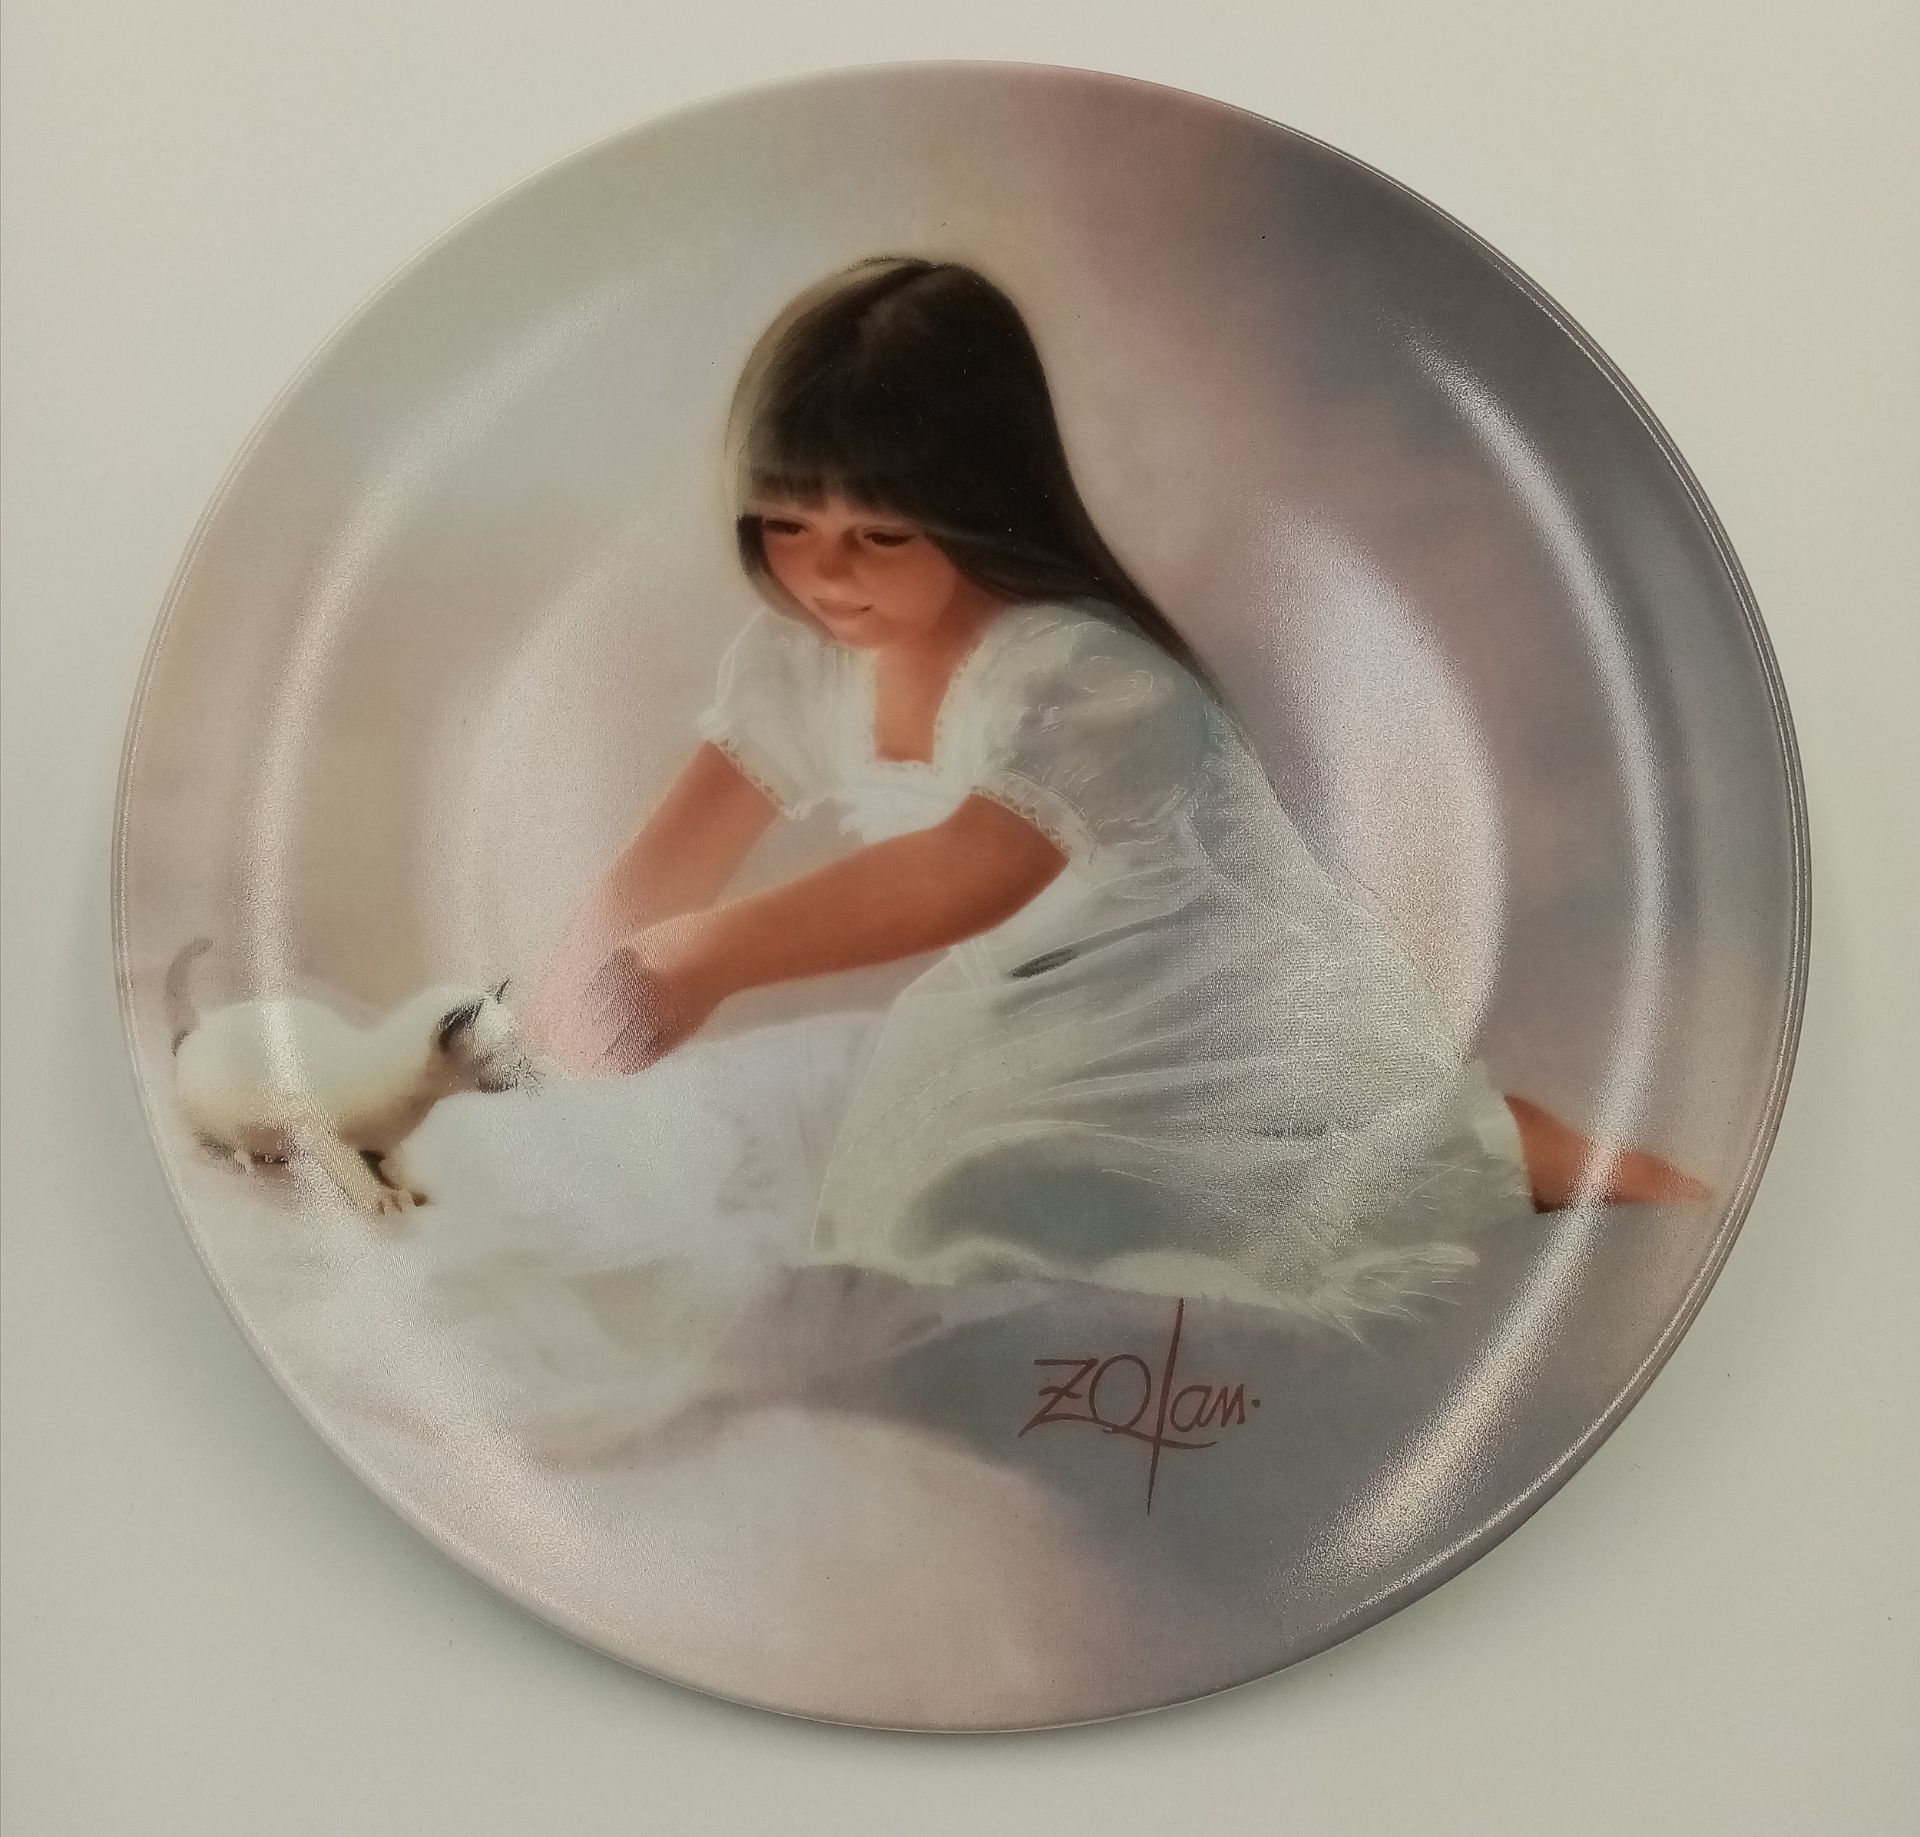 A Donald Zolan Tender Beginnings Limited Edition Ceramic Plate. Comes with COA and original - Image 5 of 5